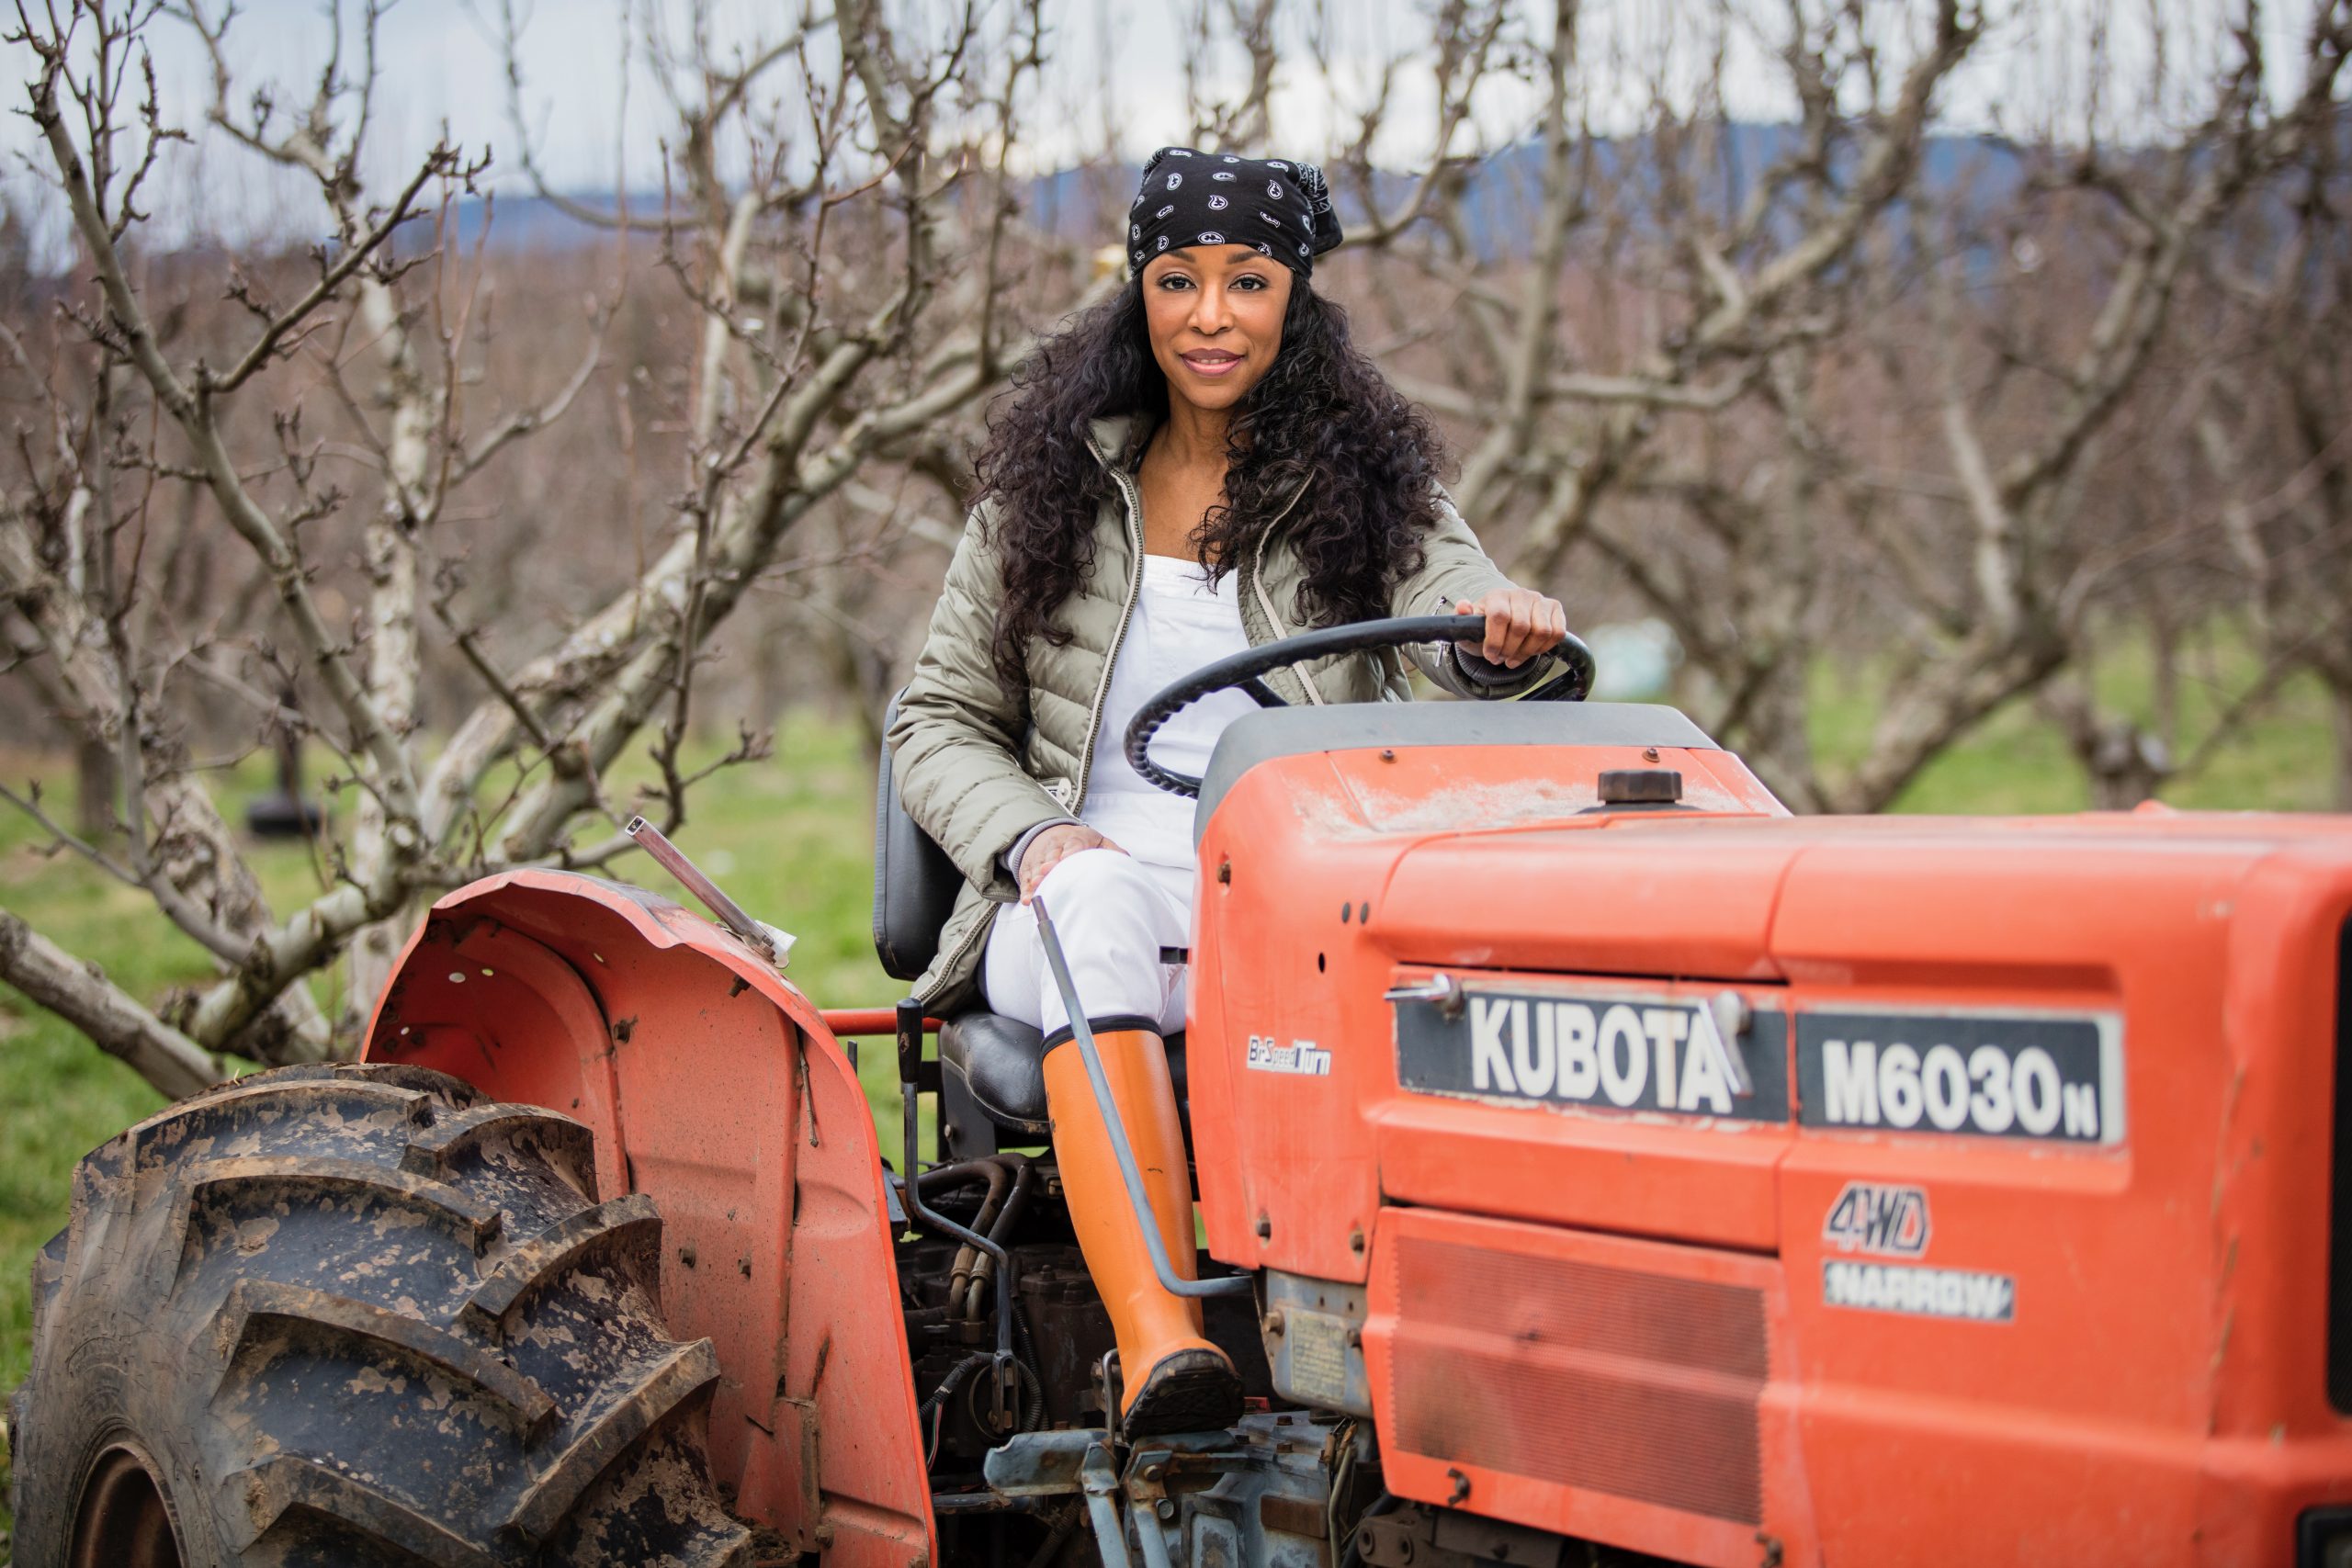 Jacqueline (Jackie) Alexander on a tractor